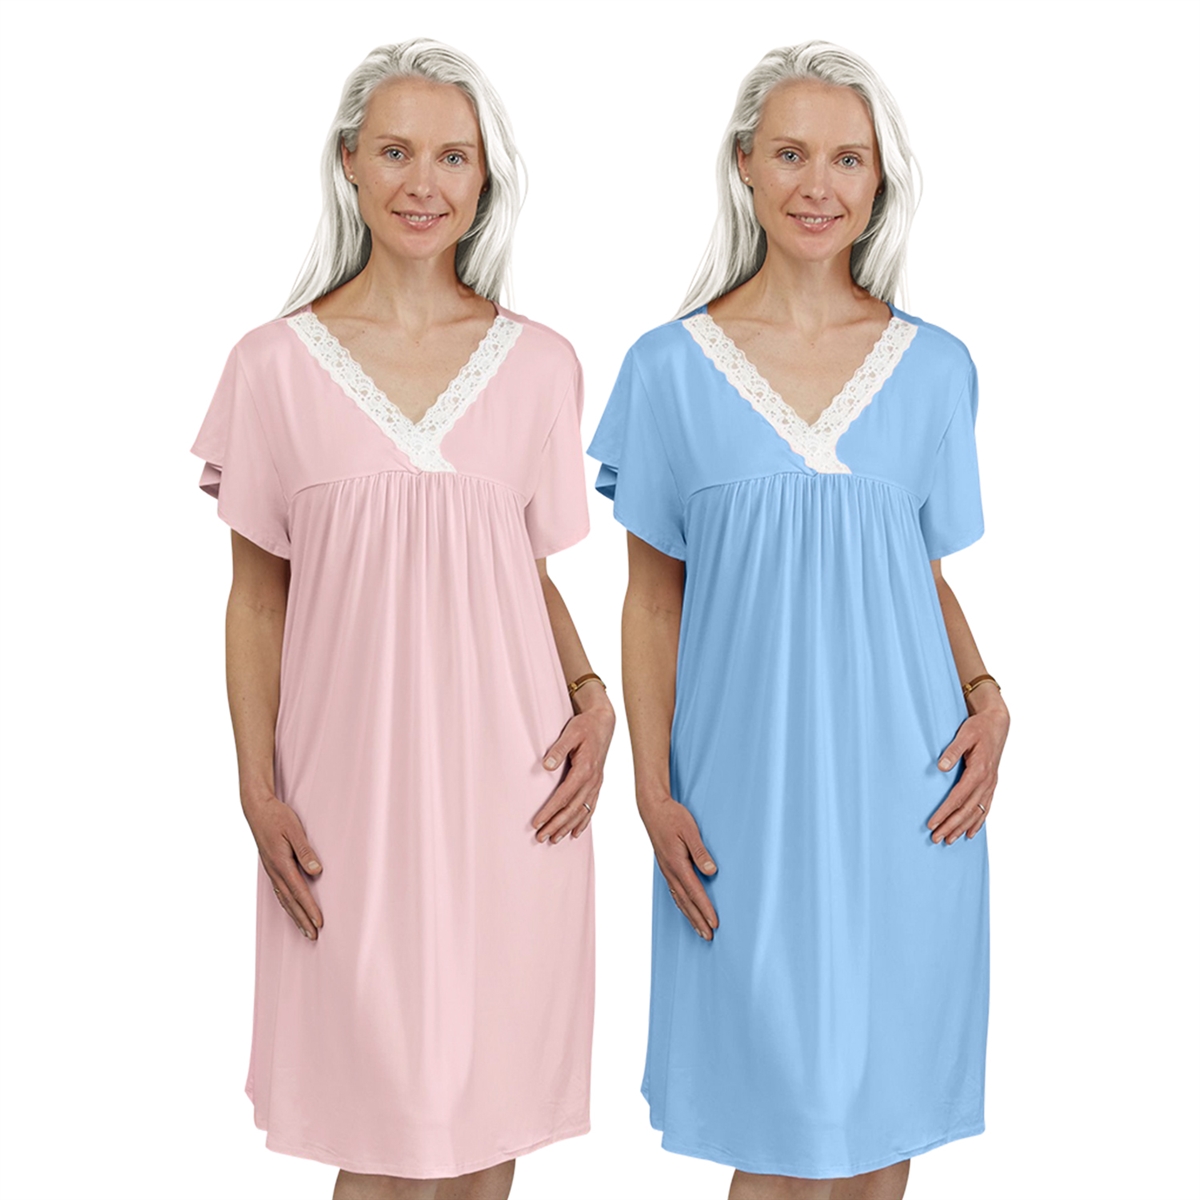 2 color pack-Womens all season nightgown, night gowns for adult women, sleep  shirts for women, night gown nightshirts for women, grandma nightgown,.  Short sleeve sleep dress, Lightweight knit fabric V-neck pajama dress,